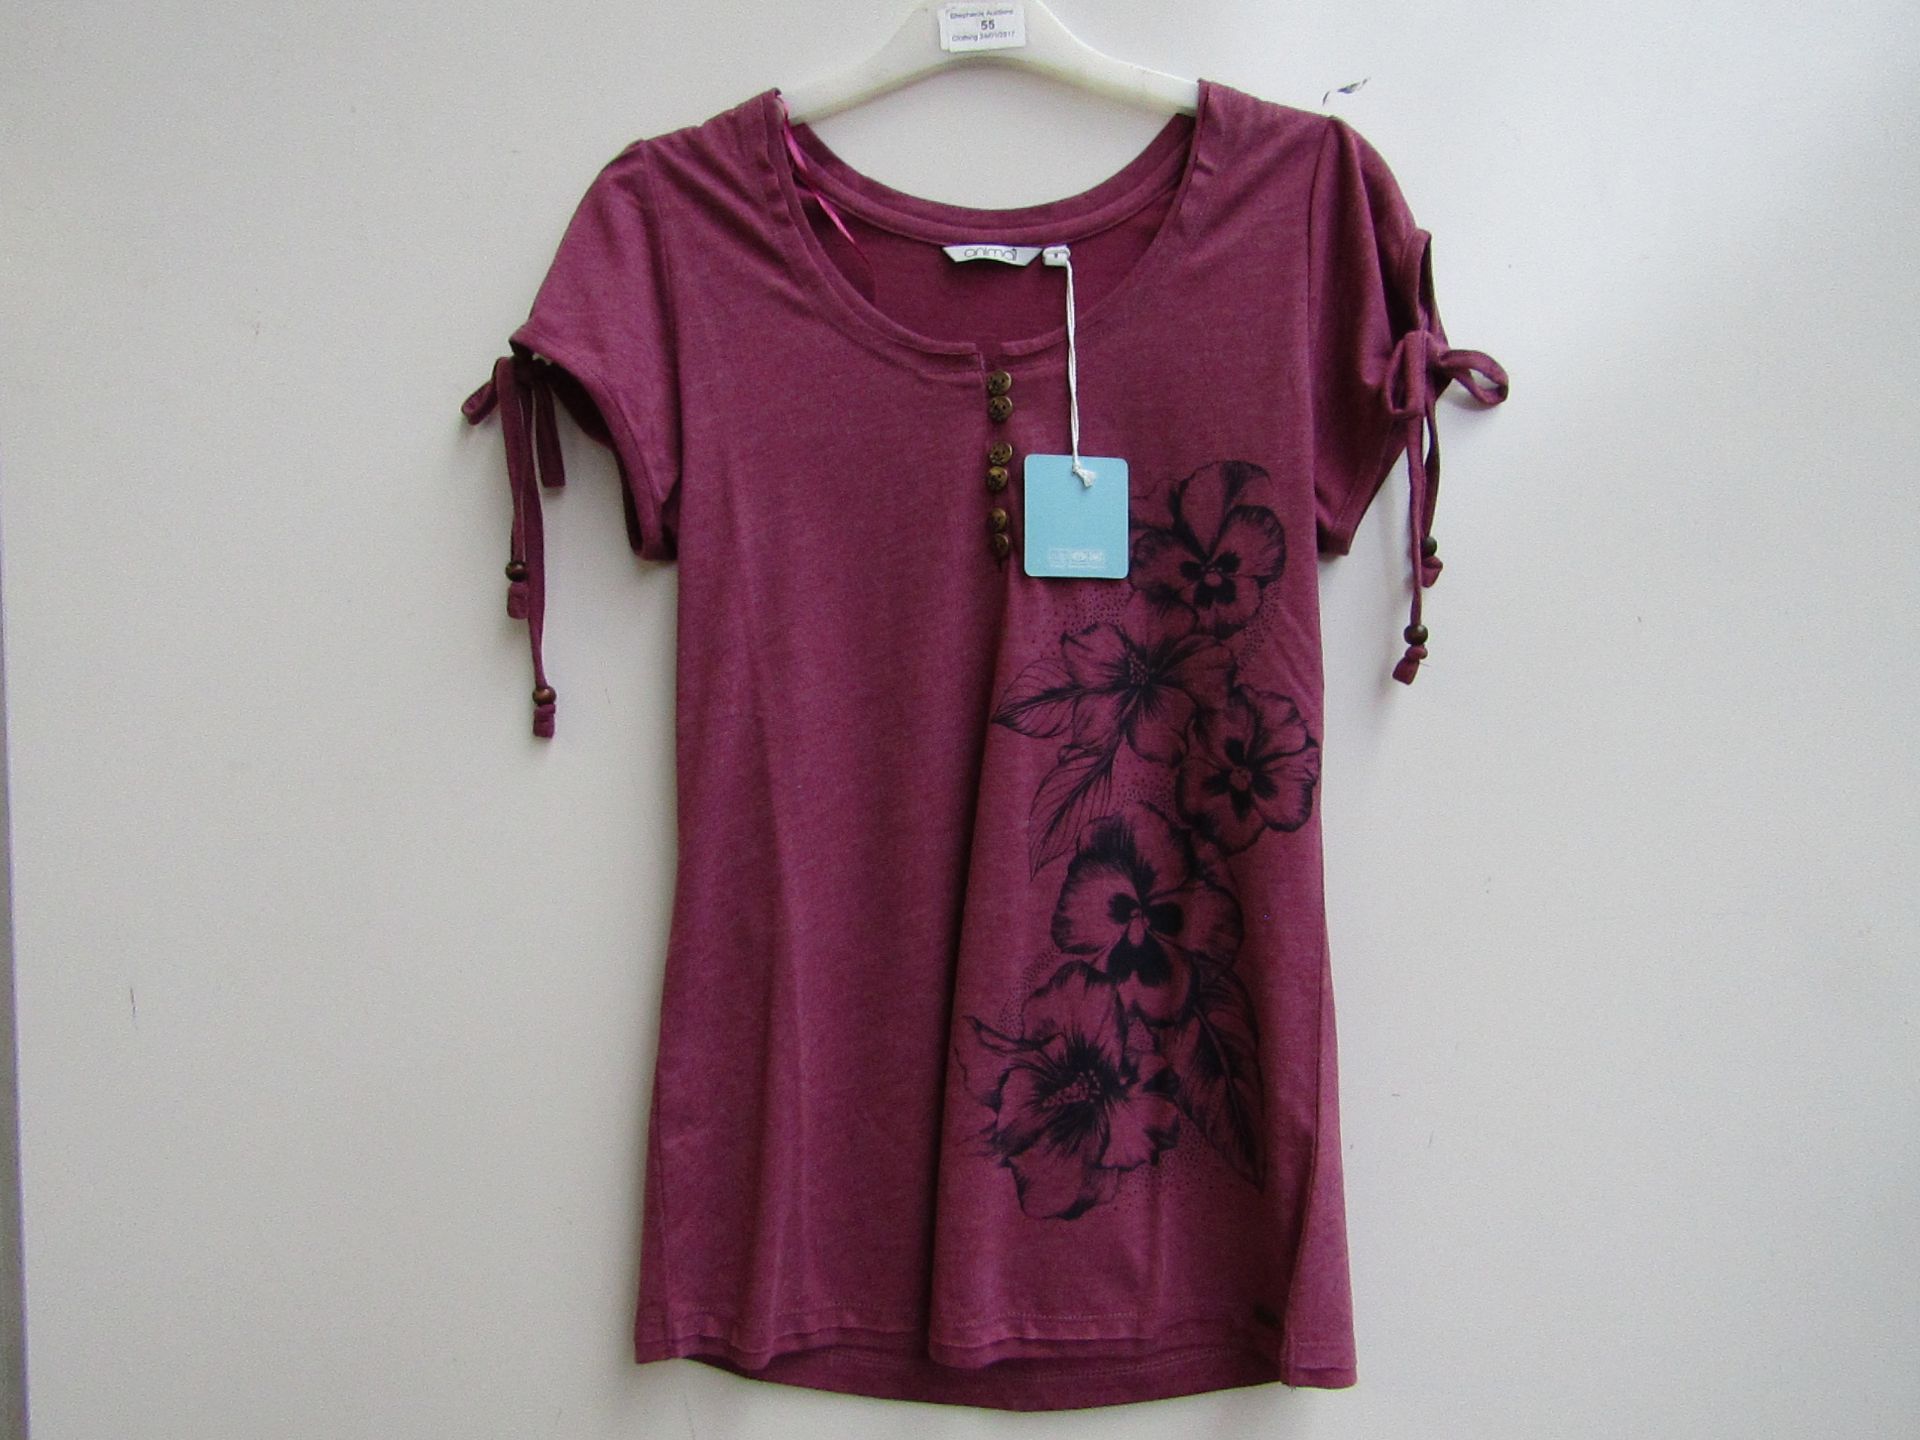 Ladies Animal T-shirt. Size 8. New with Tags